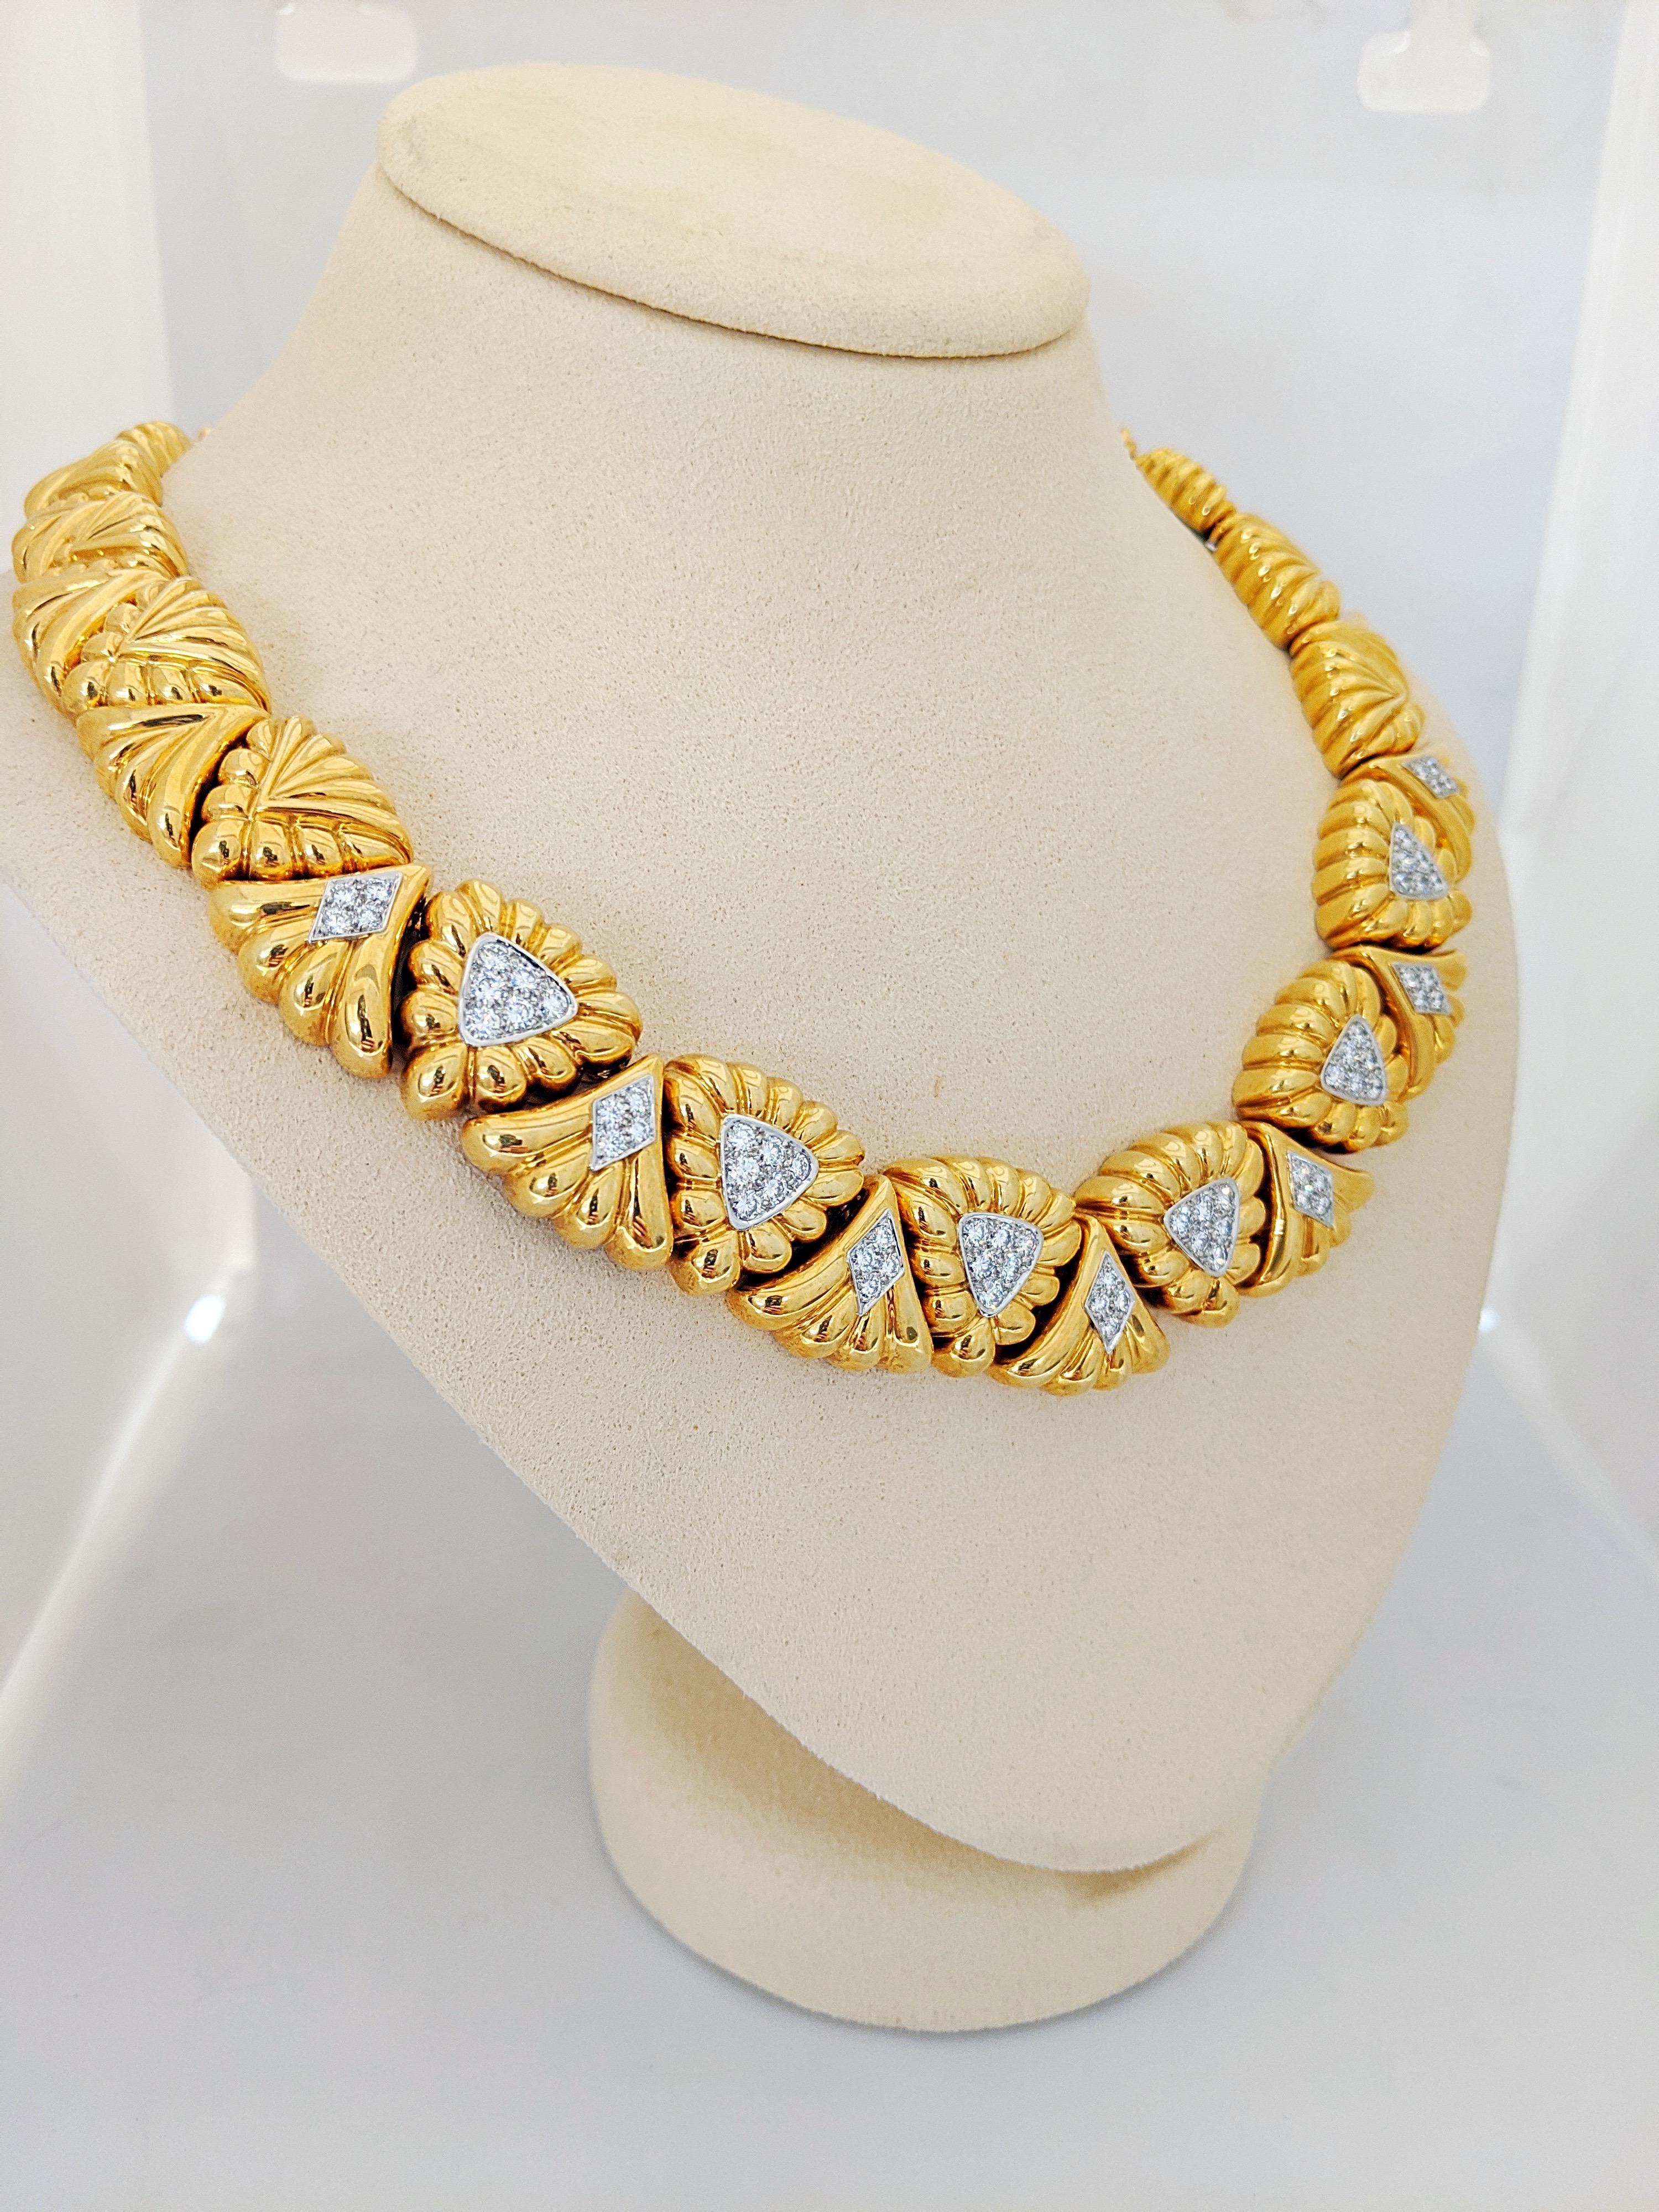 Chaavae Platinum and 18 Karat Yellow Gold and 2.92 Carat Diamond Collar Necklace For Sale 3